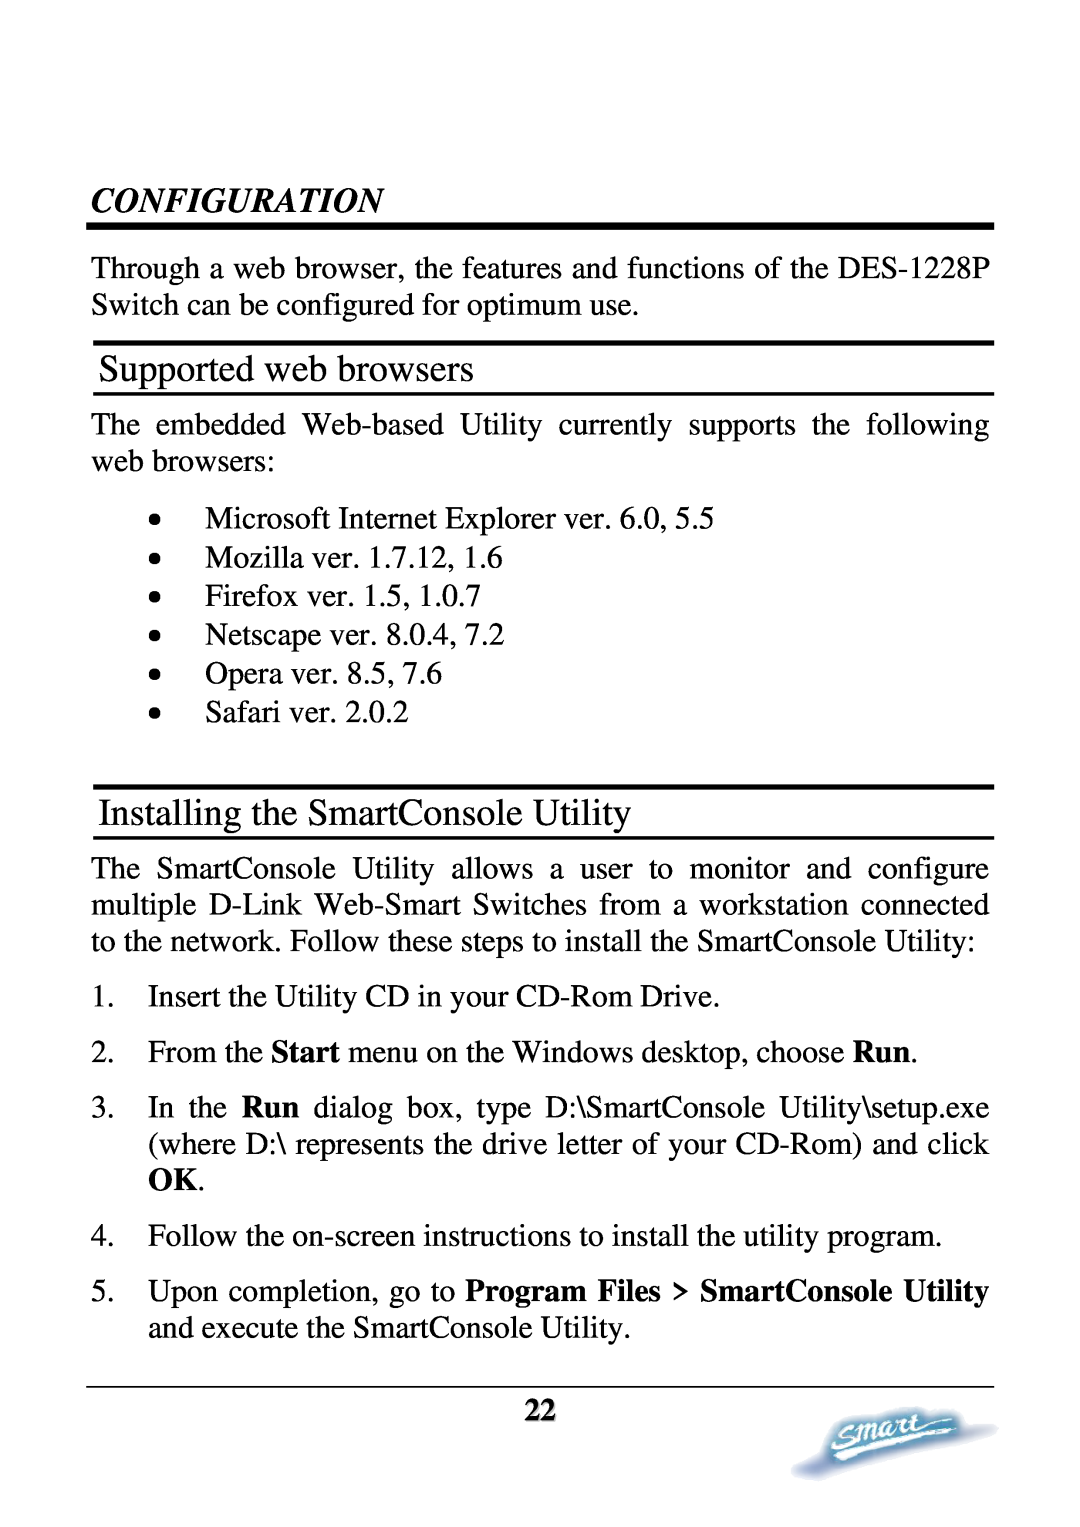 D-Link DES-1228P user manual Supported web browsers, Installing the SmartConsole Utility, Configuration 